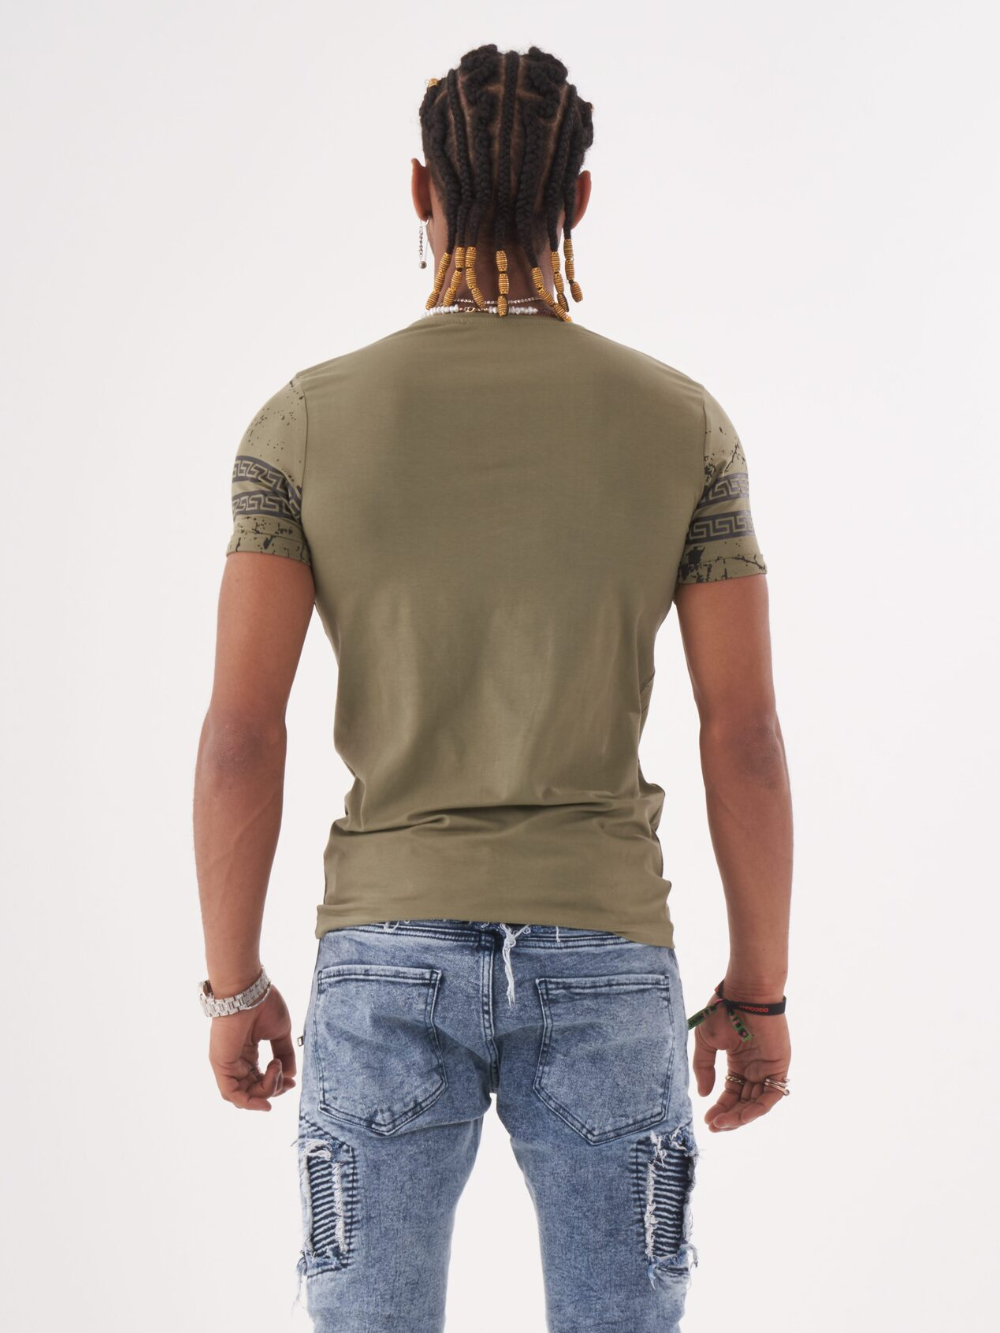 The back view of a man wearing an AFTERLIFE T-SHIRT and jeans.